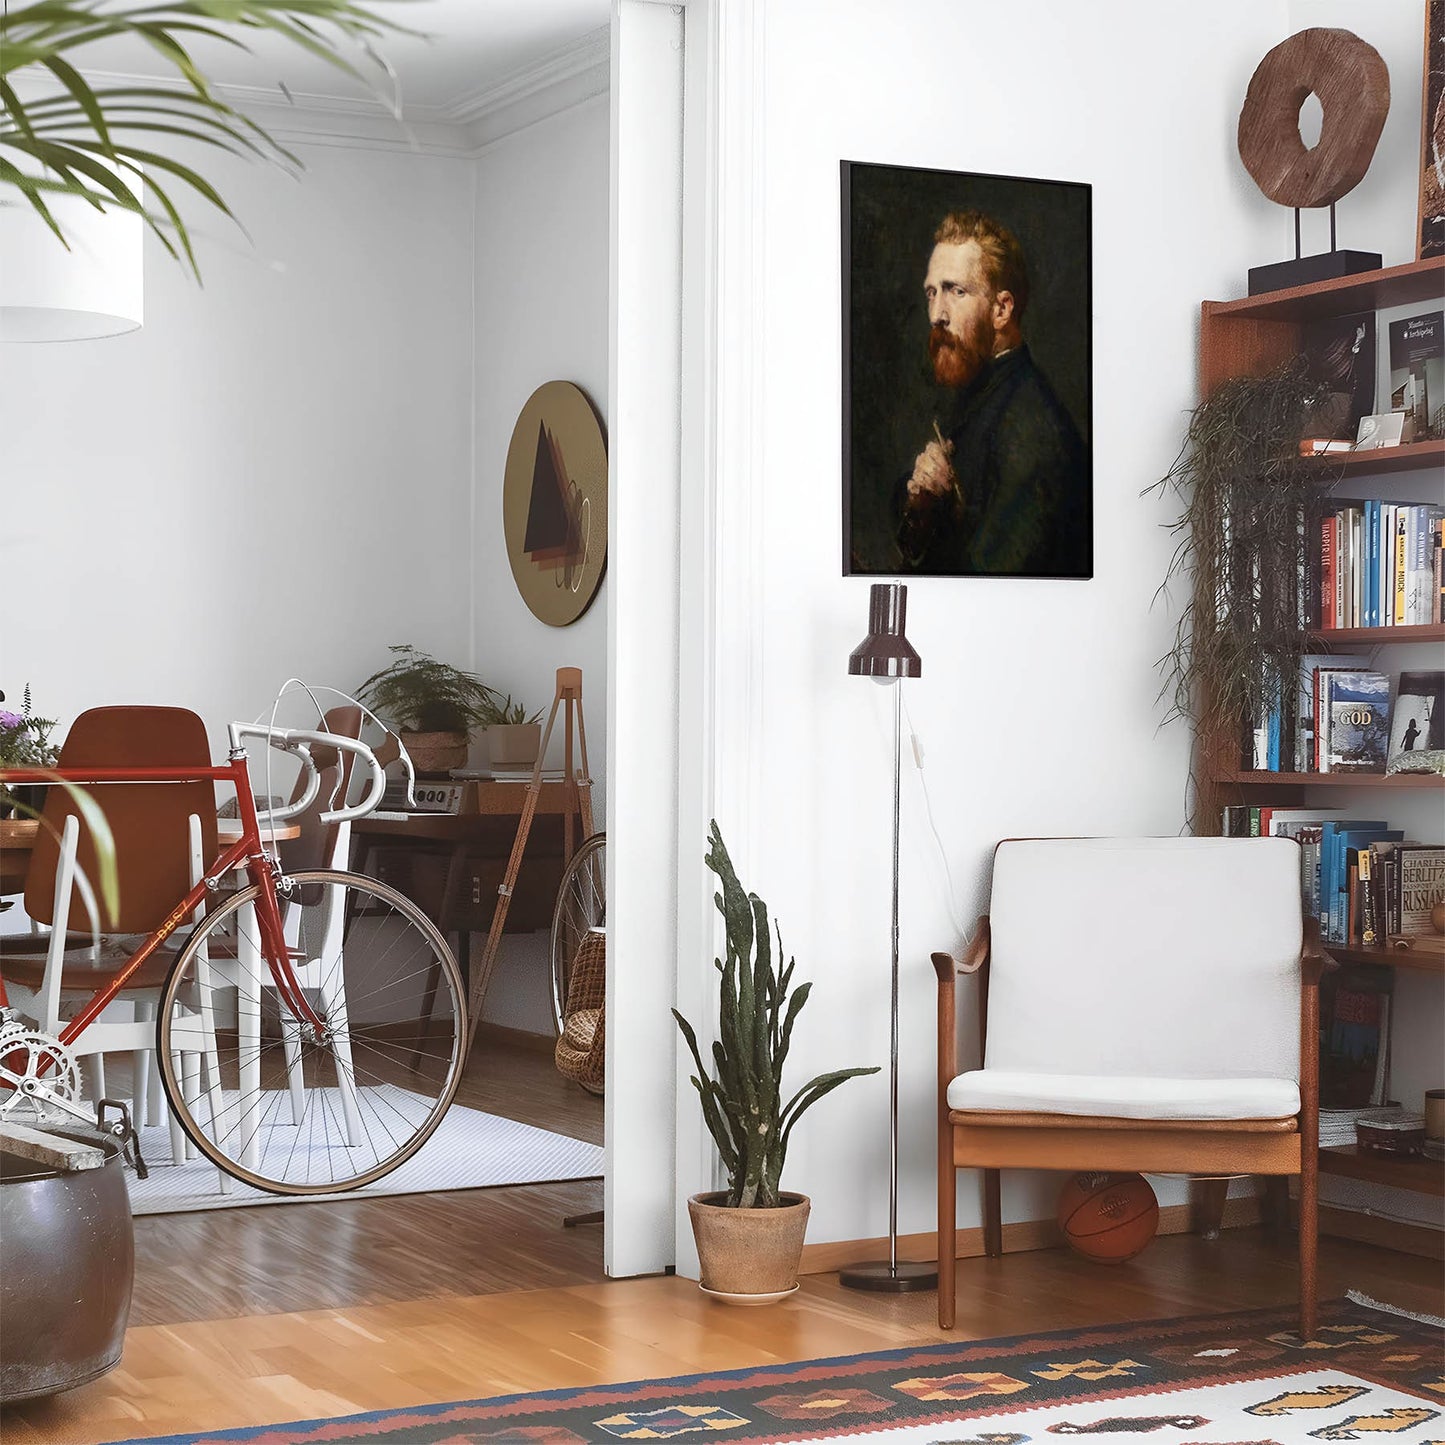 Eclectic living room with a road bike, bookshelf and house plants that features framed artwork of a Academia above a chair and lamp